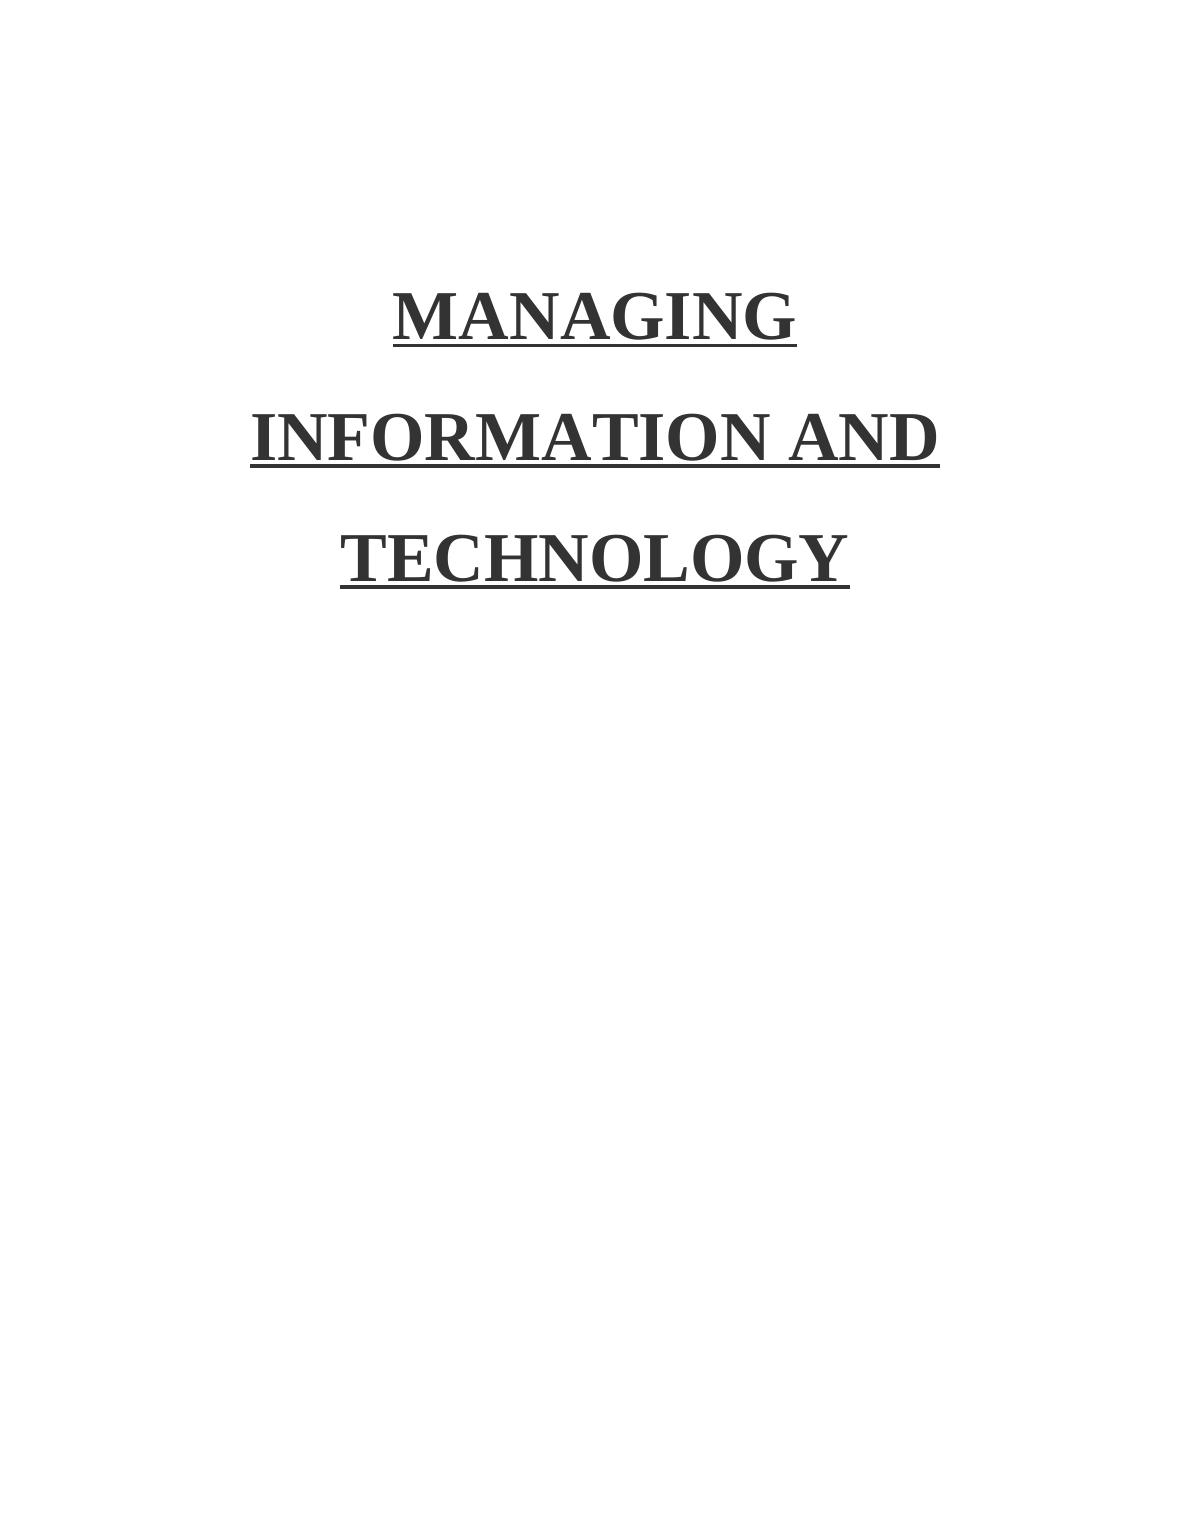 Managing Information and Technology in Boots UK Ltd._1